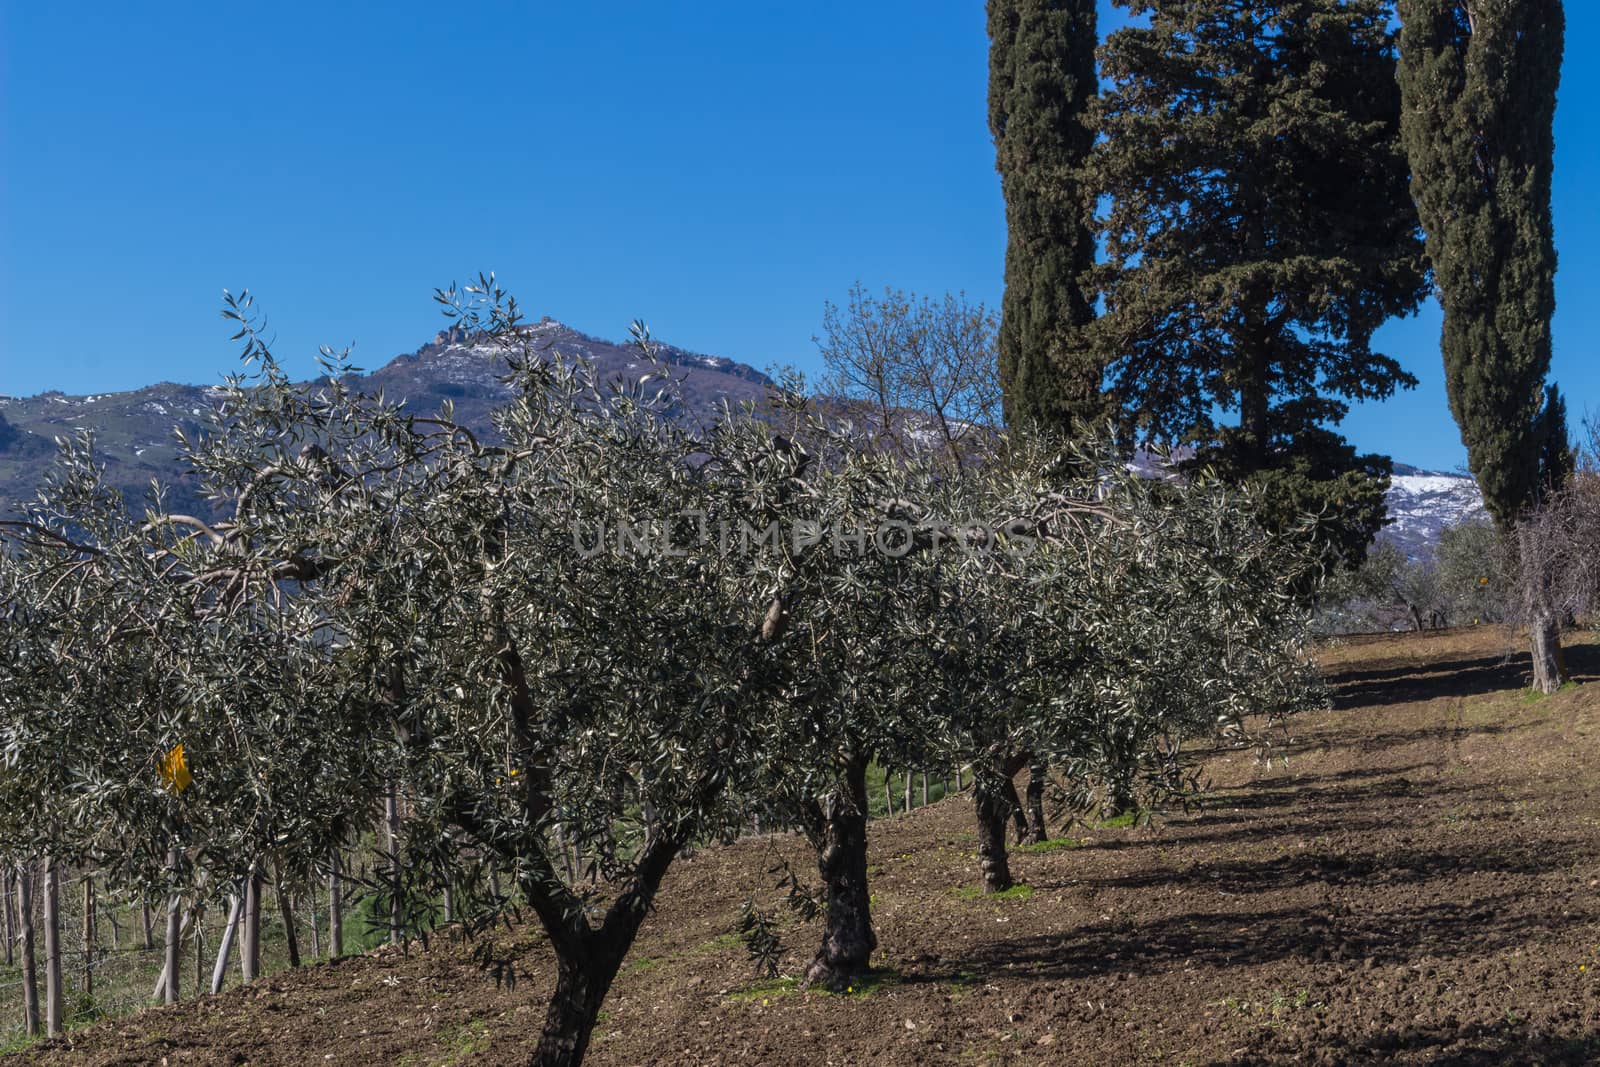 The olive grove by alanstix64